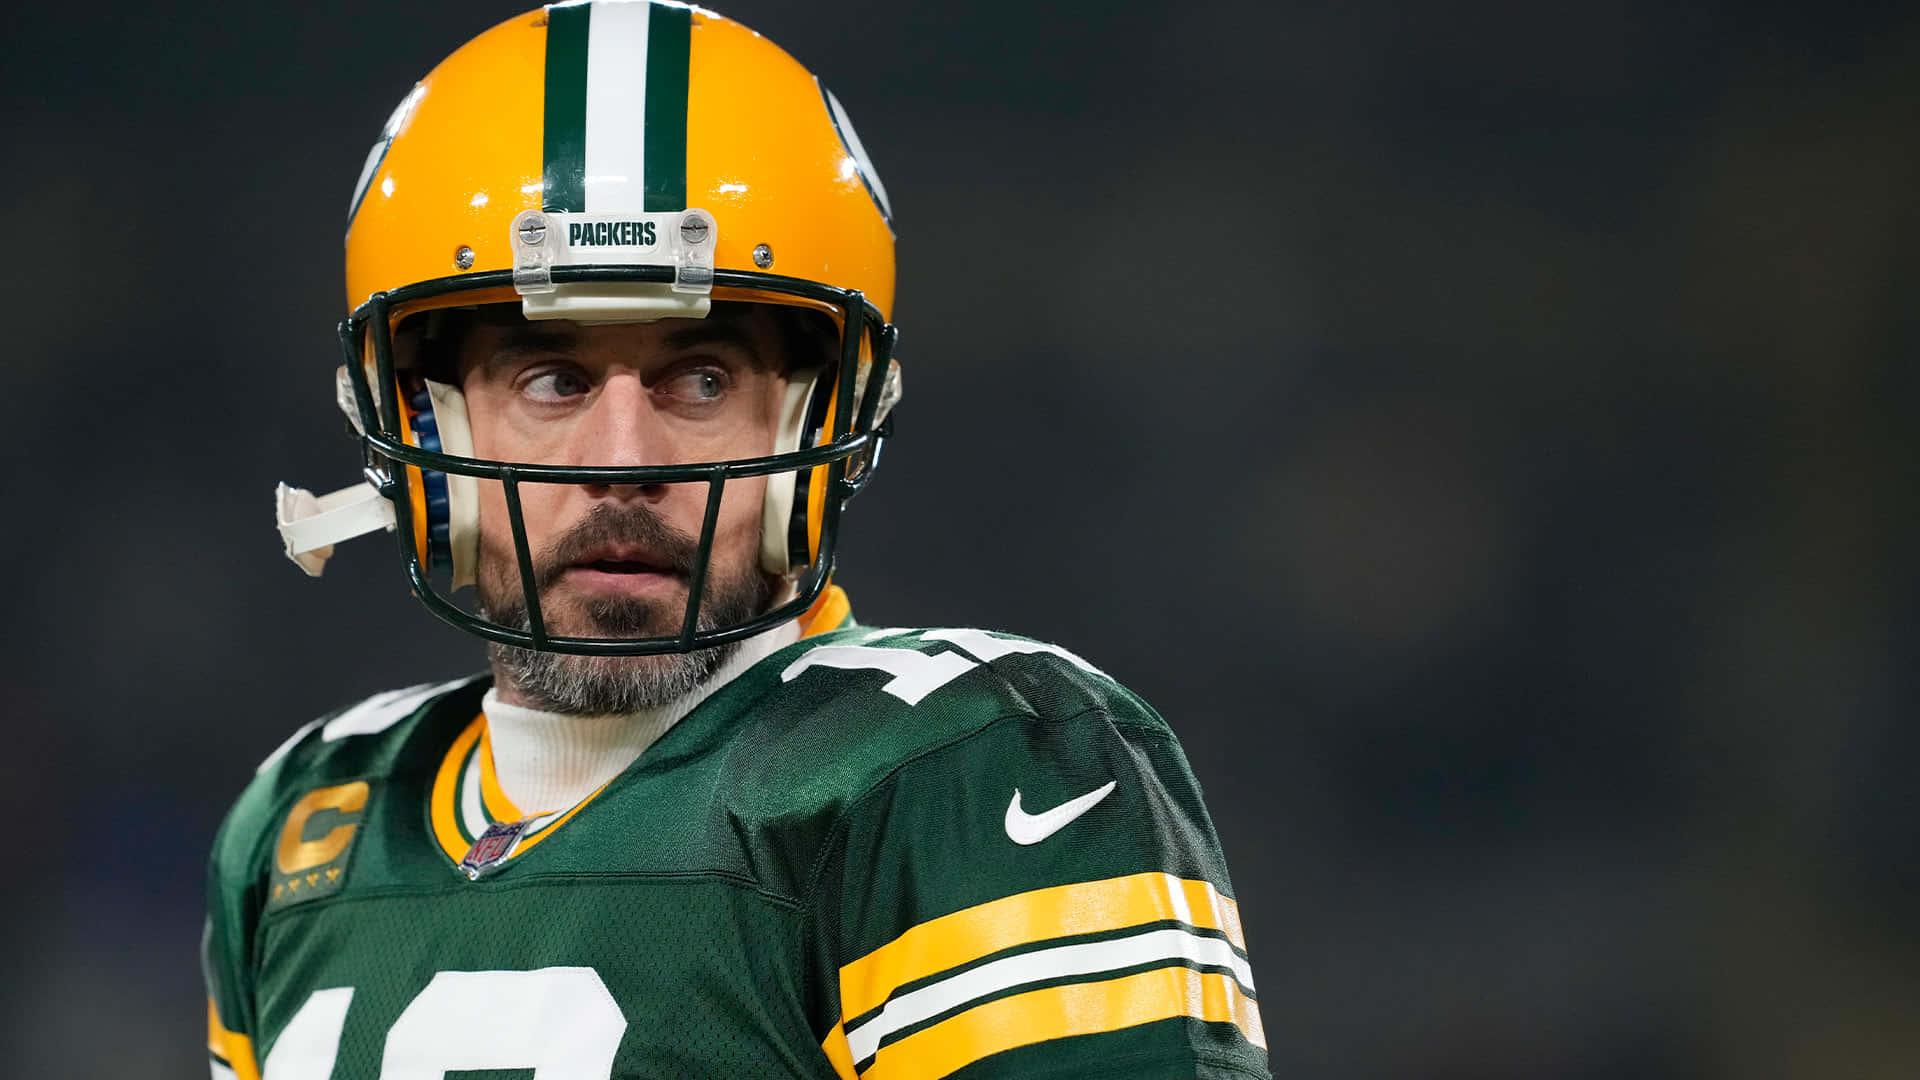 Green Bay Packers' Quarterback Aaron Rodgers